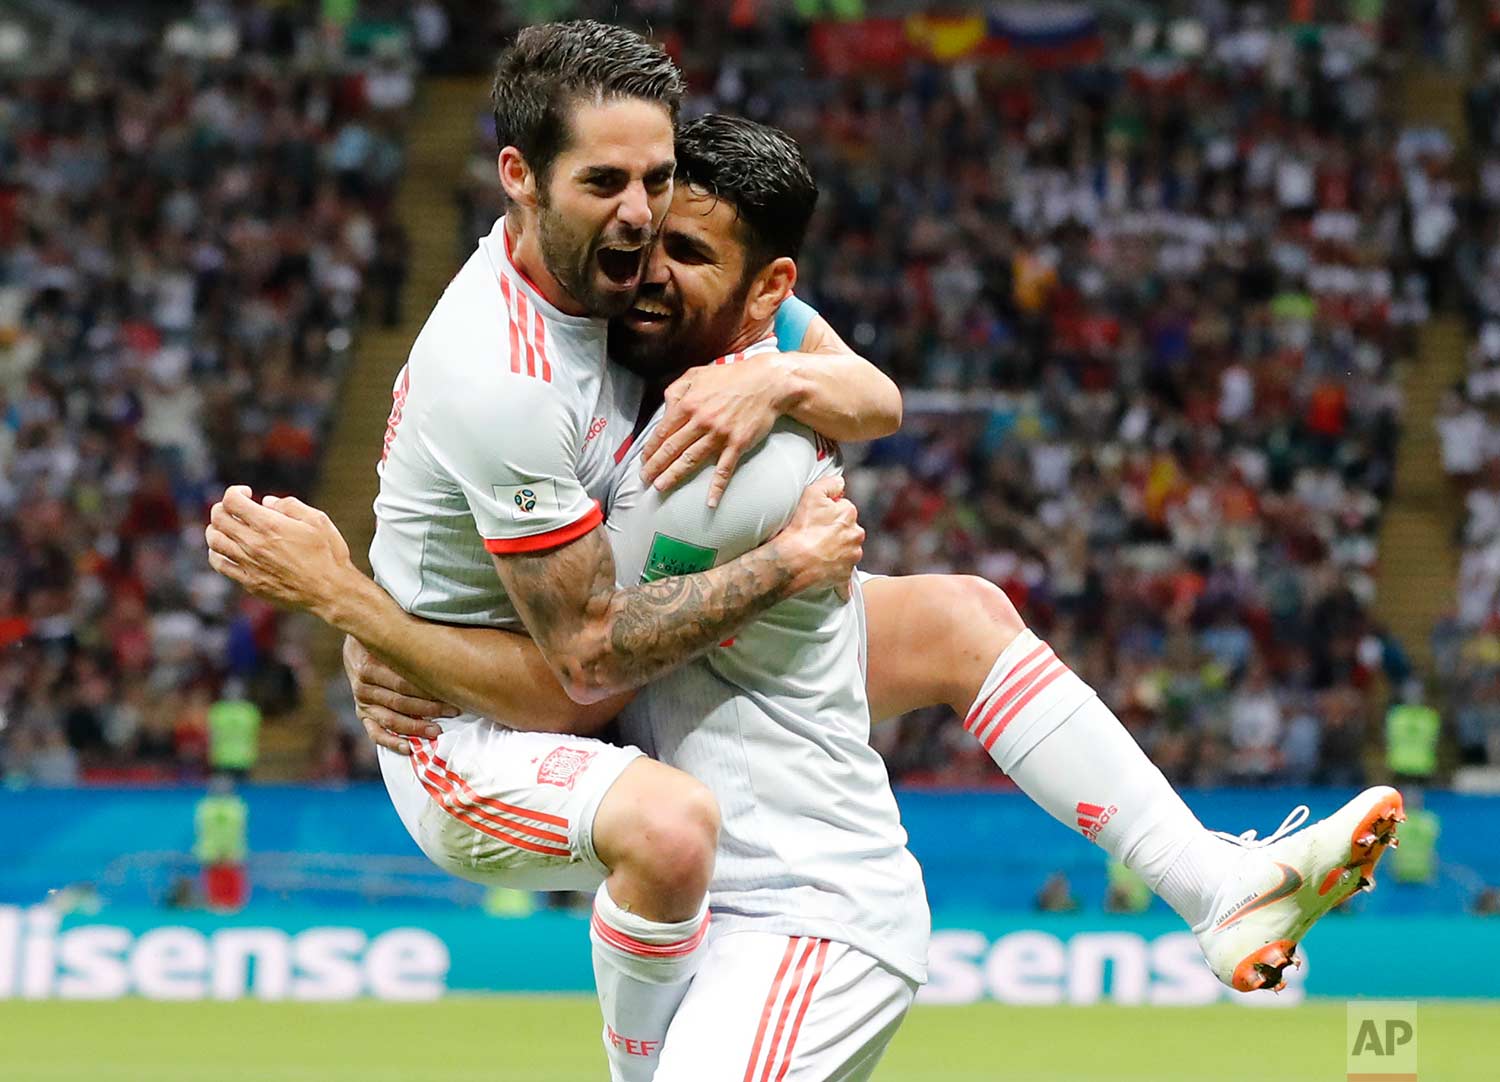  Spain's Diego Costa, right, celebrates with his teammate Isco after scoring his side's opening goal during the group B match between Iran and Spain at the 2018 soccer World Cup in the Kazan Arena in Kazan, Russia, Wednesday, June 20, 2018. (AP Photo